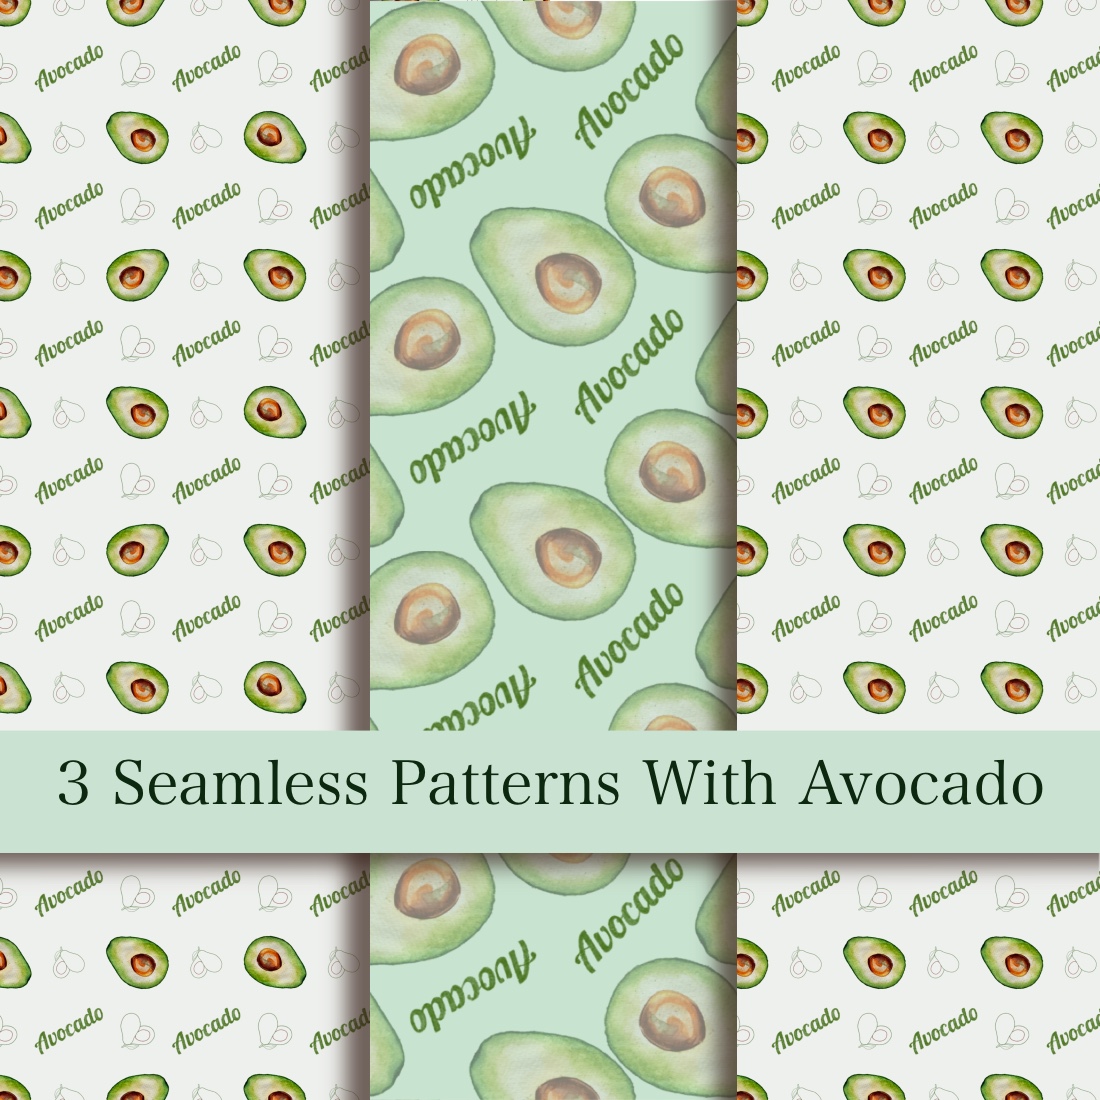 3 seamless patterns with avocado cover image.